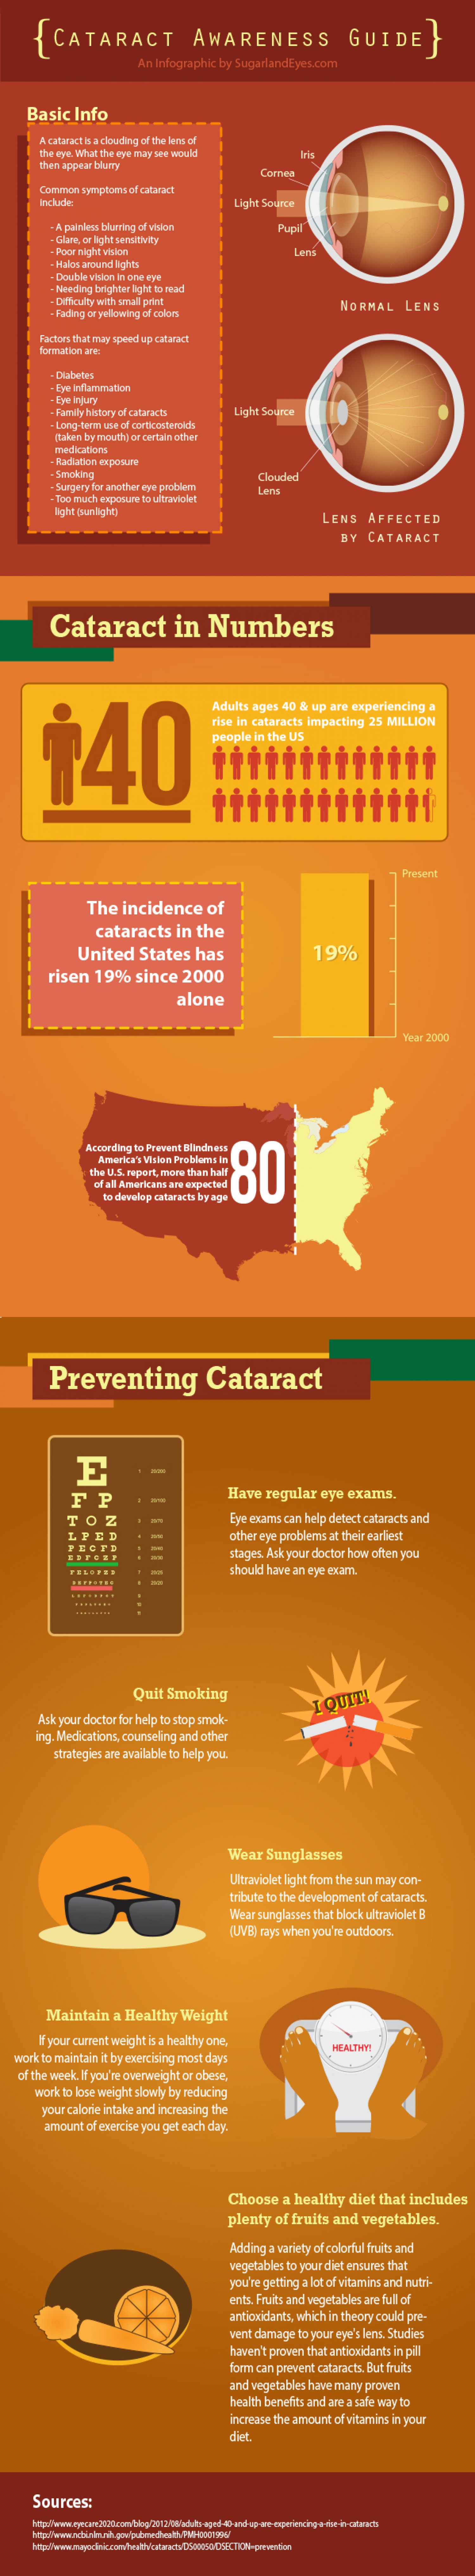 Are You at Risk for Cataracts?